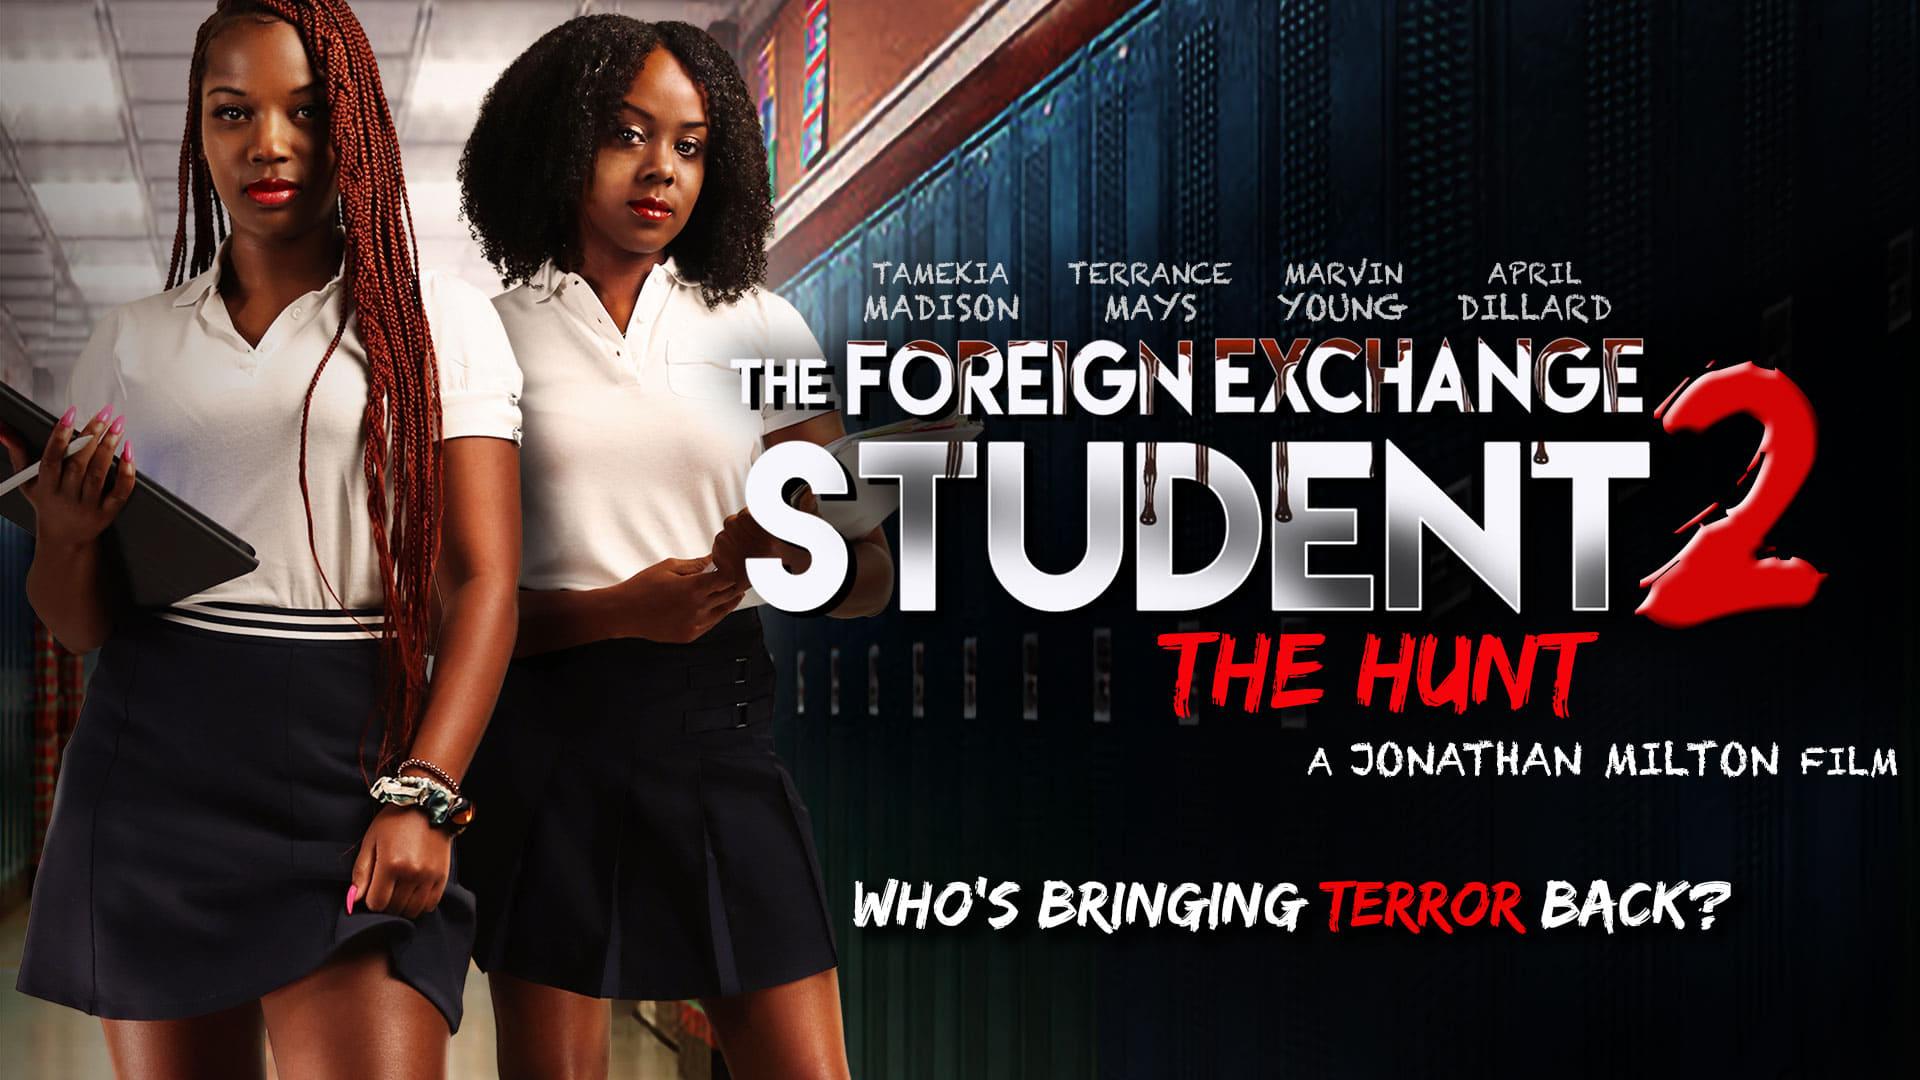 The Foreign Exchange Student 2: The Hunt backdrop